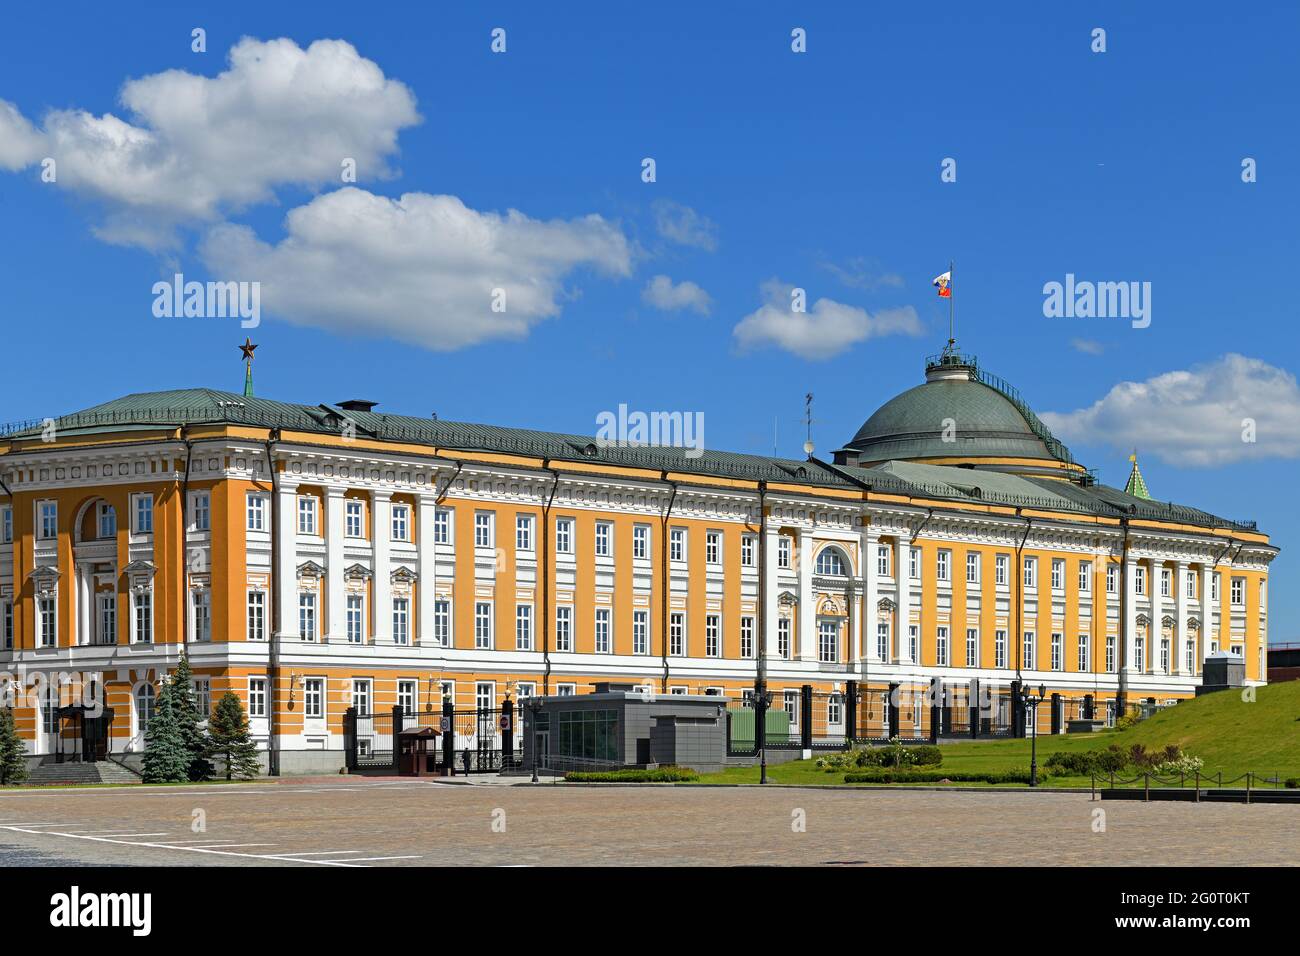 Building was built by architect Kazakov in 1776-1787, intended for Senate. Moscow Kremlin, Russia Stock Photo